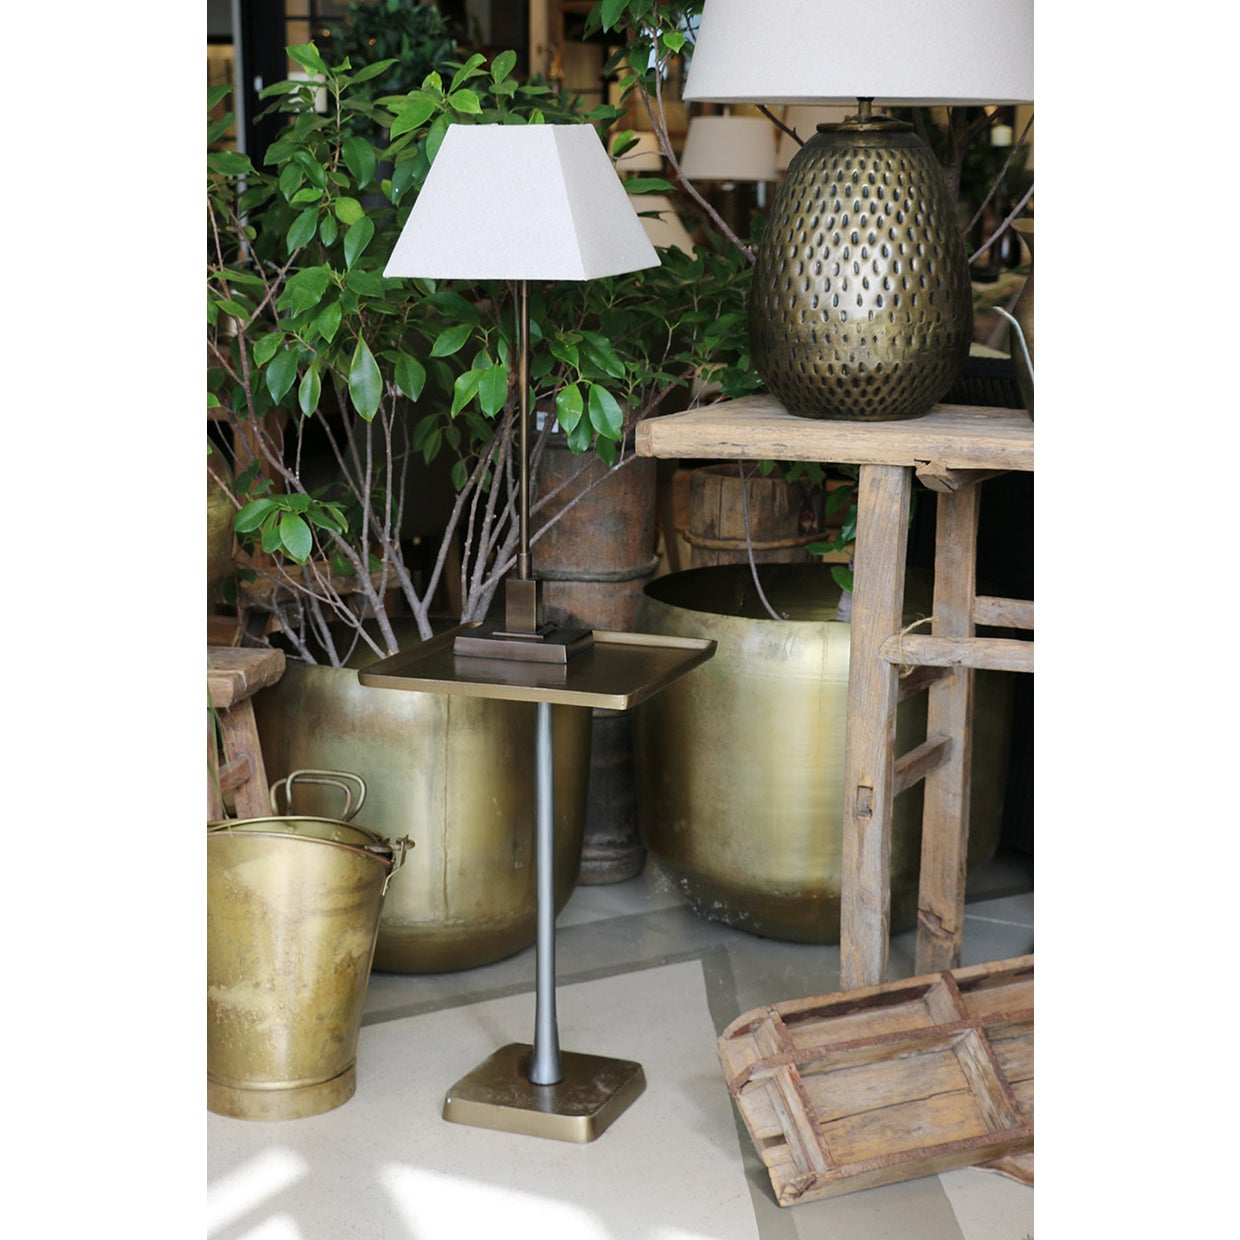 Marrakesh Square Occasional Pedestal Table in Brass Antique Finish